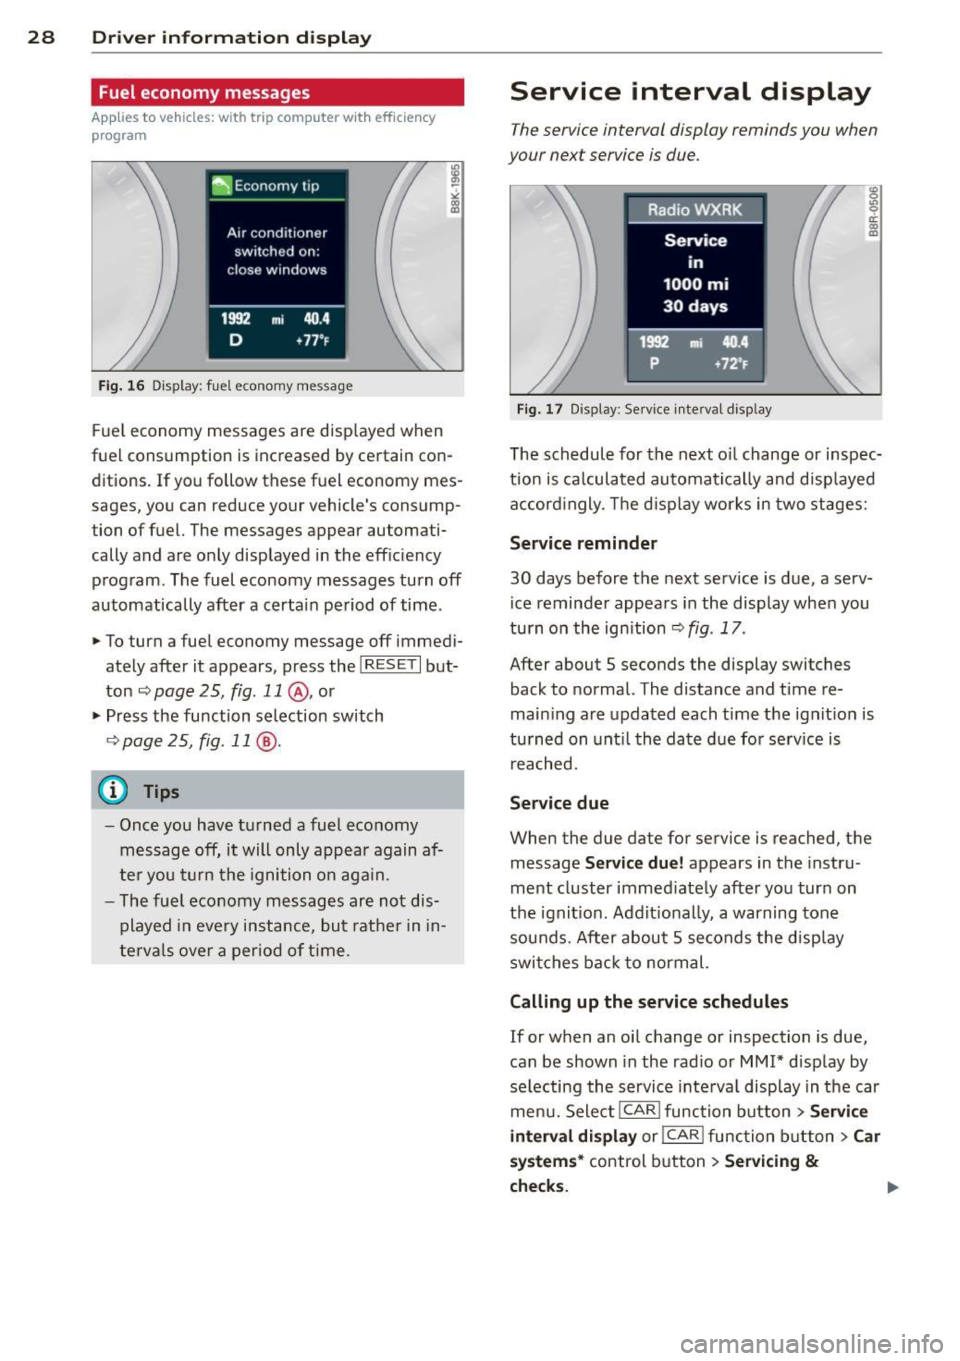 AUDI S4 2015  Owners Manual 28  Driver  information  d isplay 
Fuel  economy  messages 
App lies  to vehicles:  with  trip  computer  w ith  eff ici ency 
program 
Fig.  16  Display:  fuel  economy  message 
F ue l economy  mess